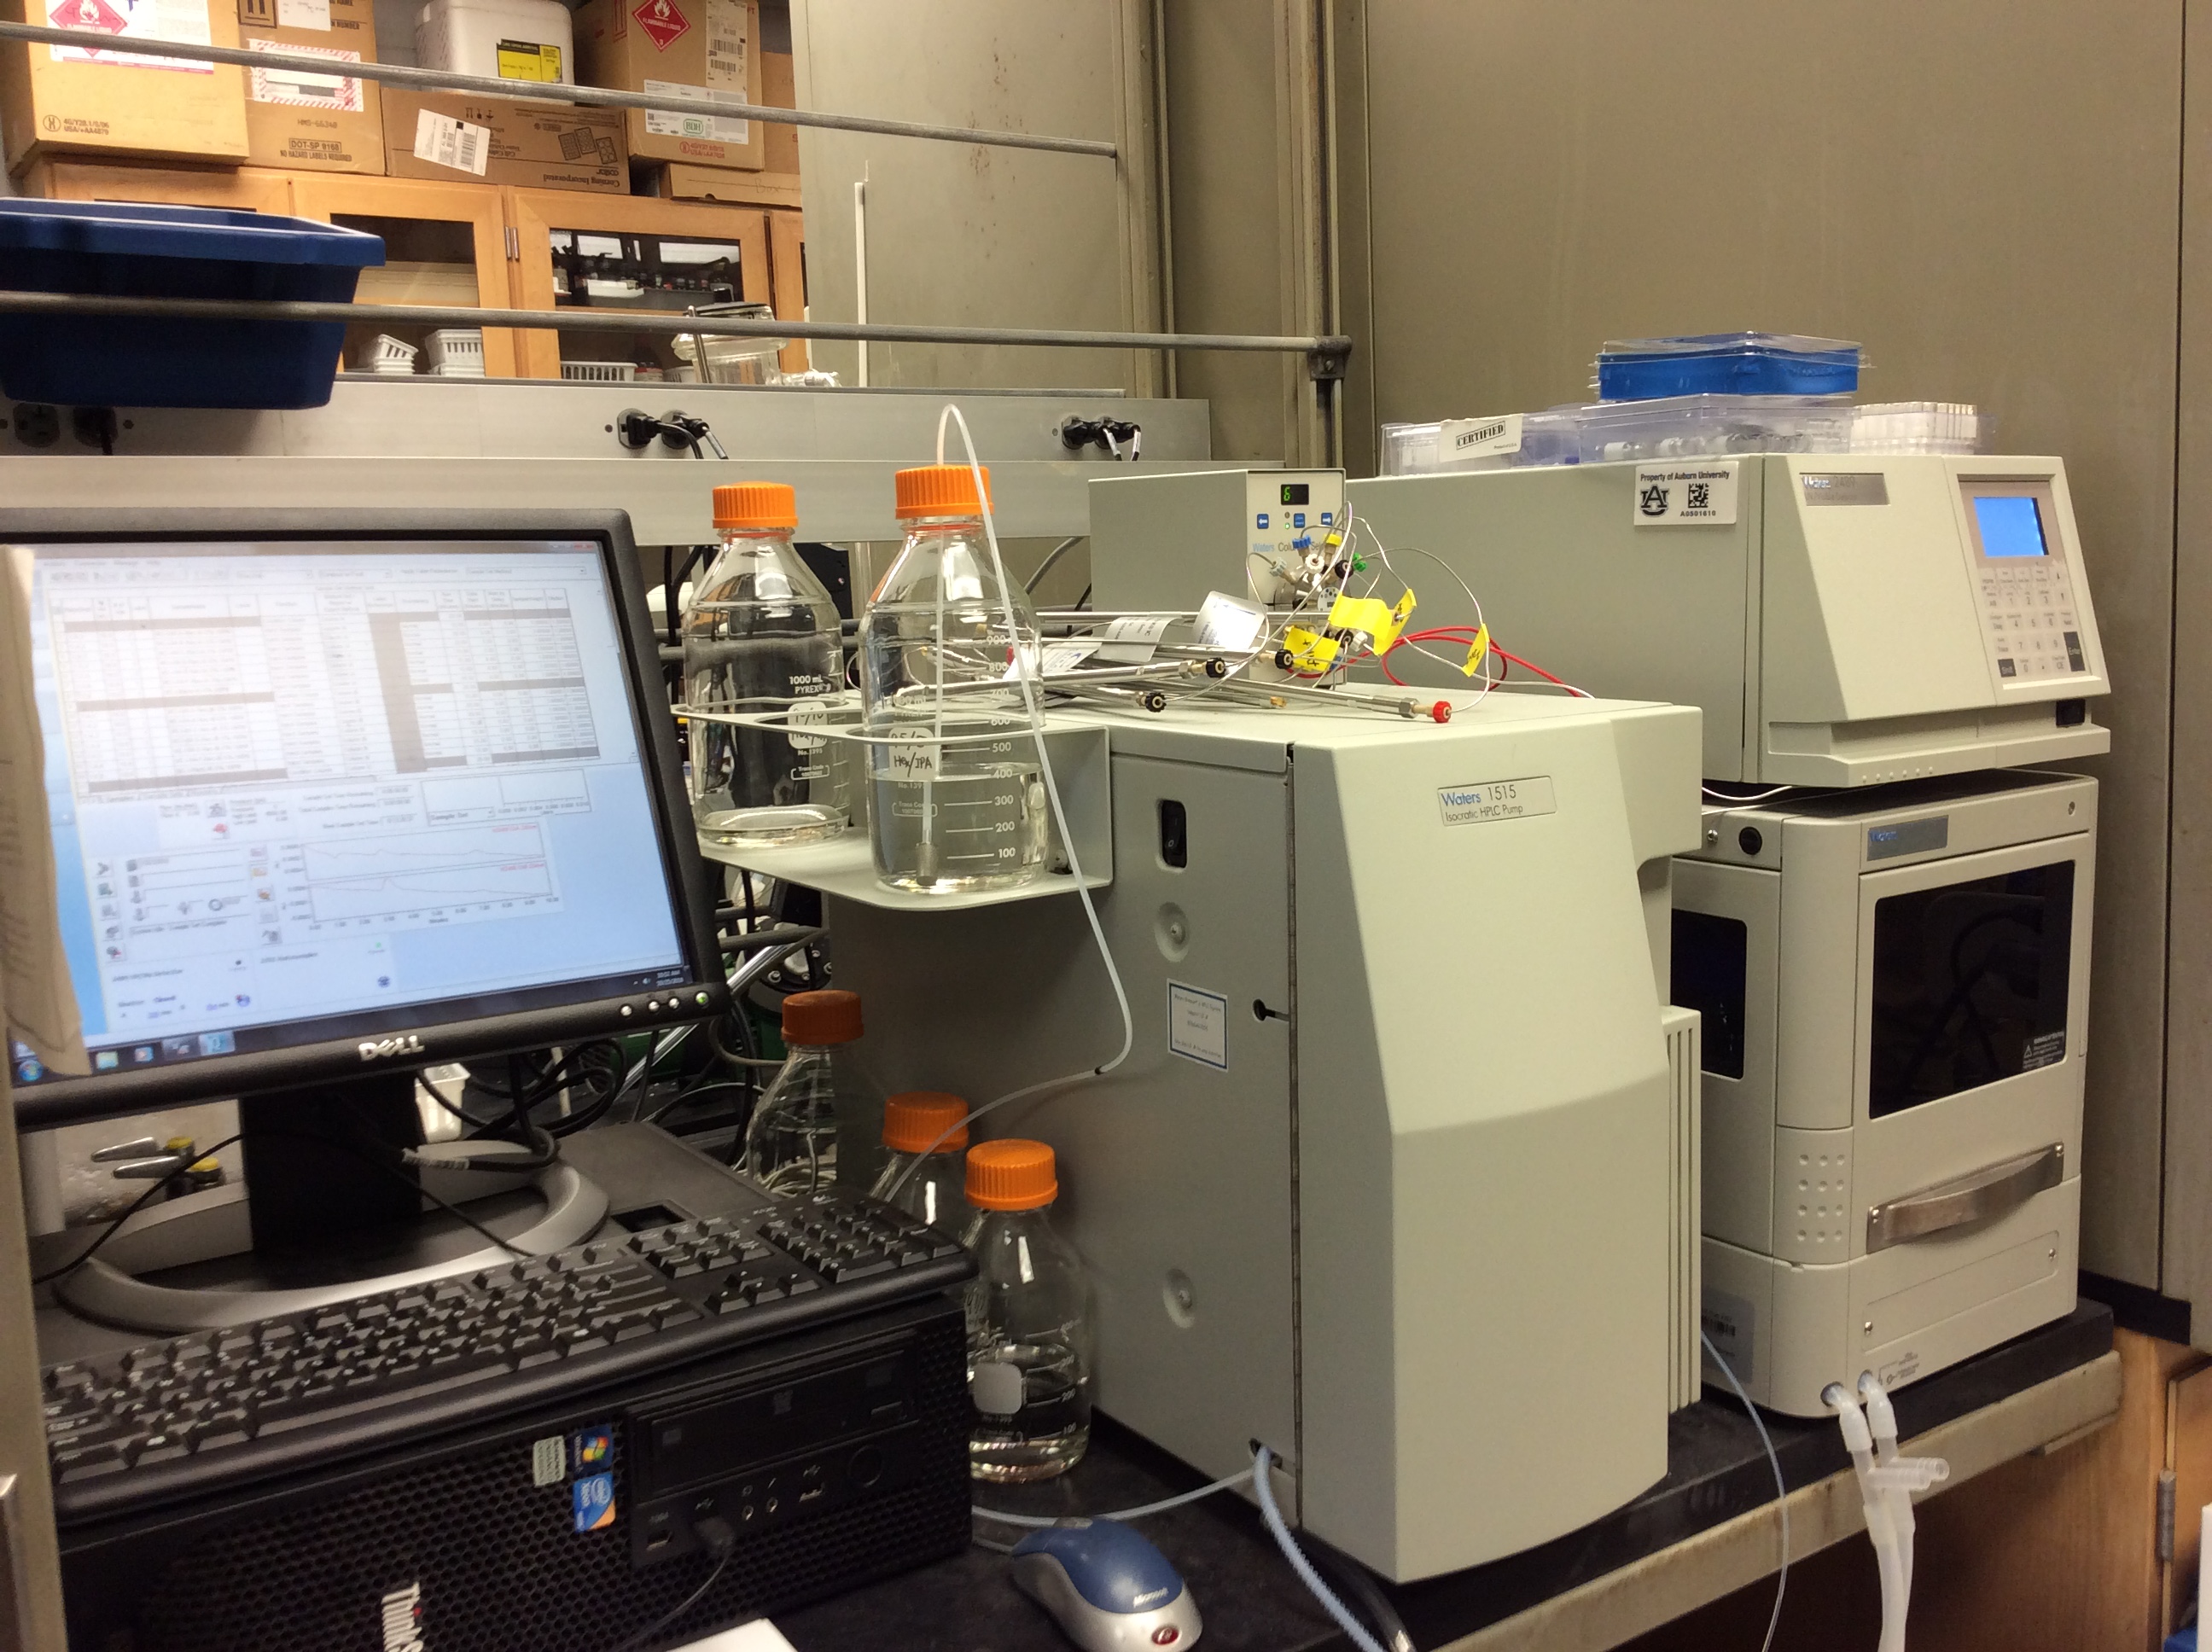 This equipment is used to determine the enantiomeric excess of chiral, nonracemic compounds.